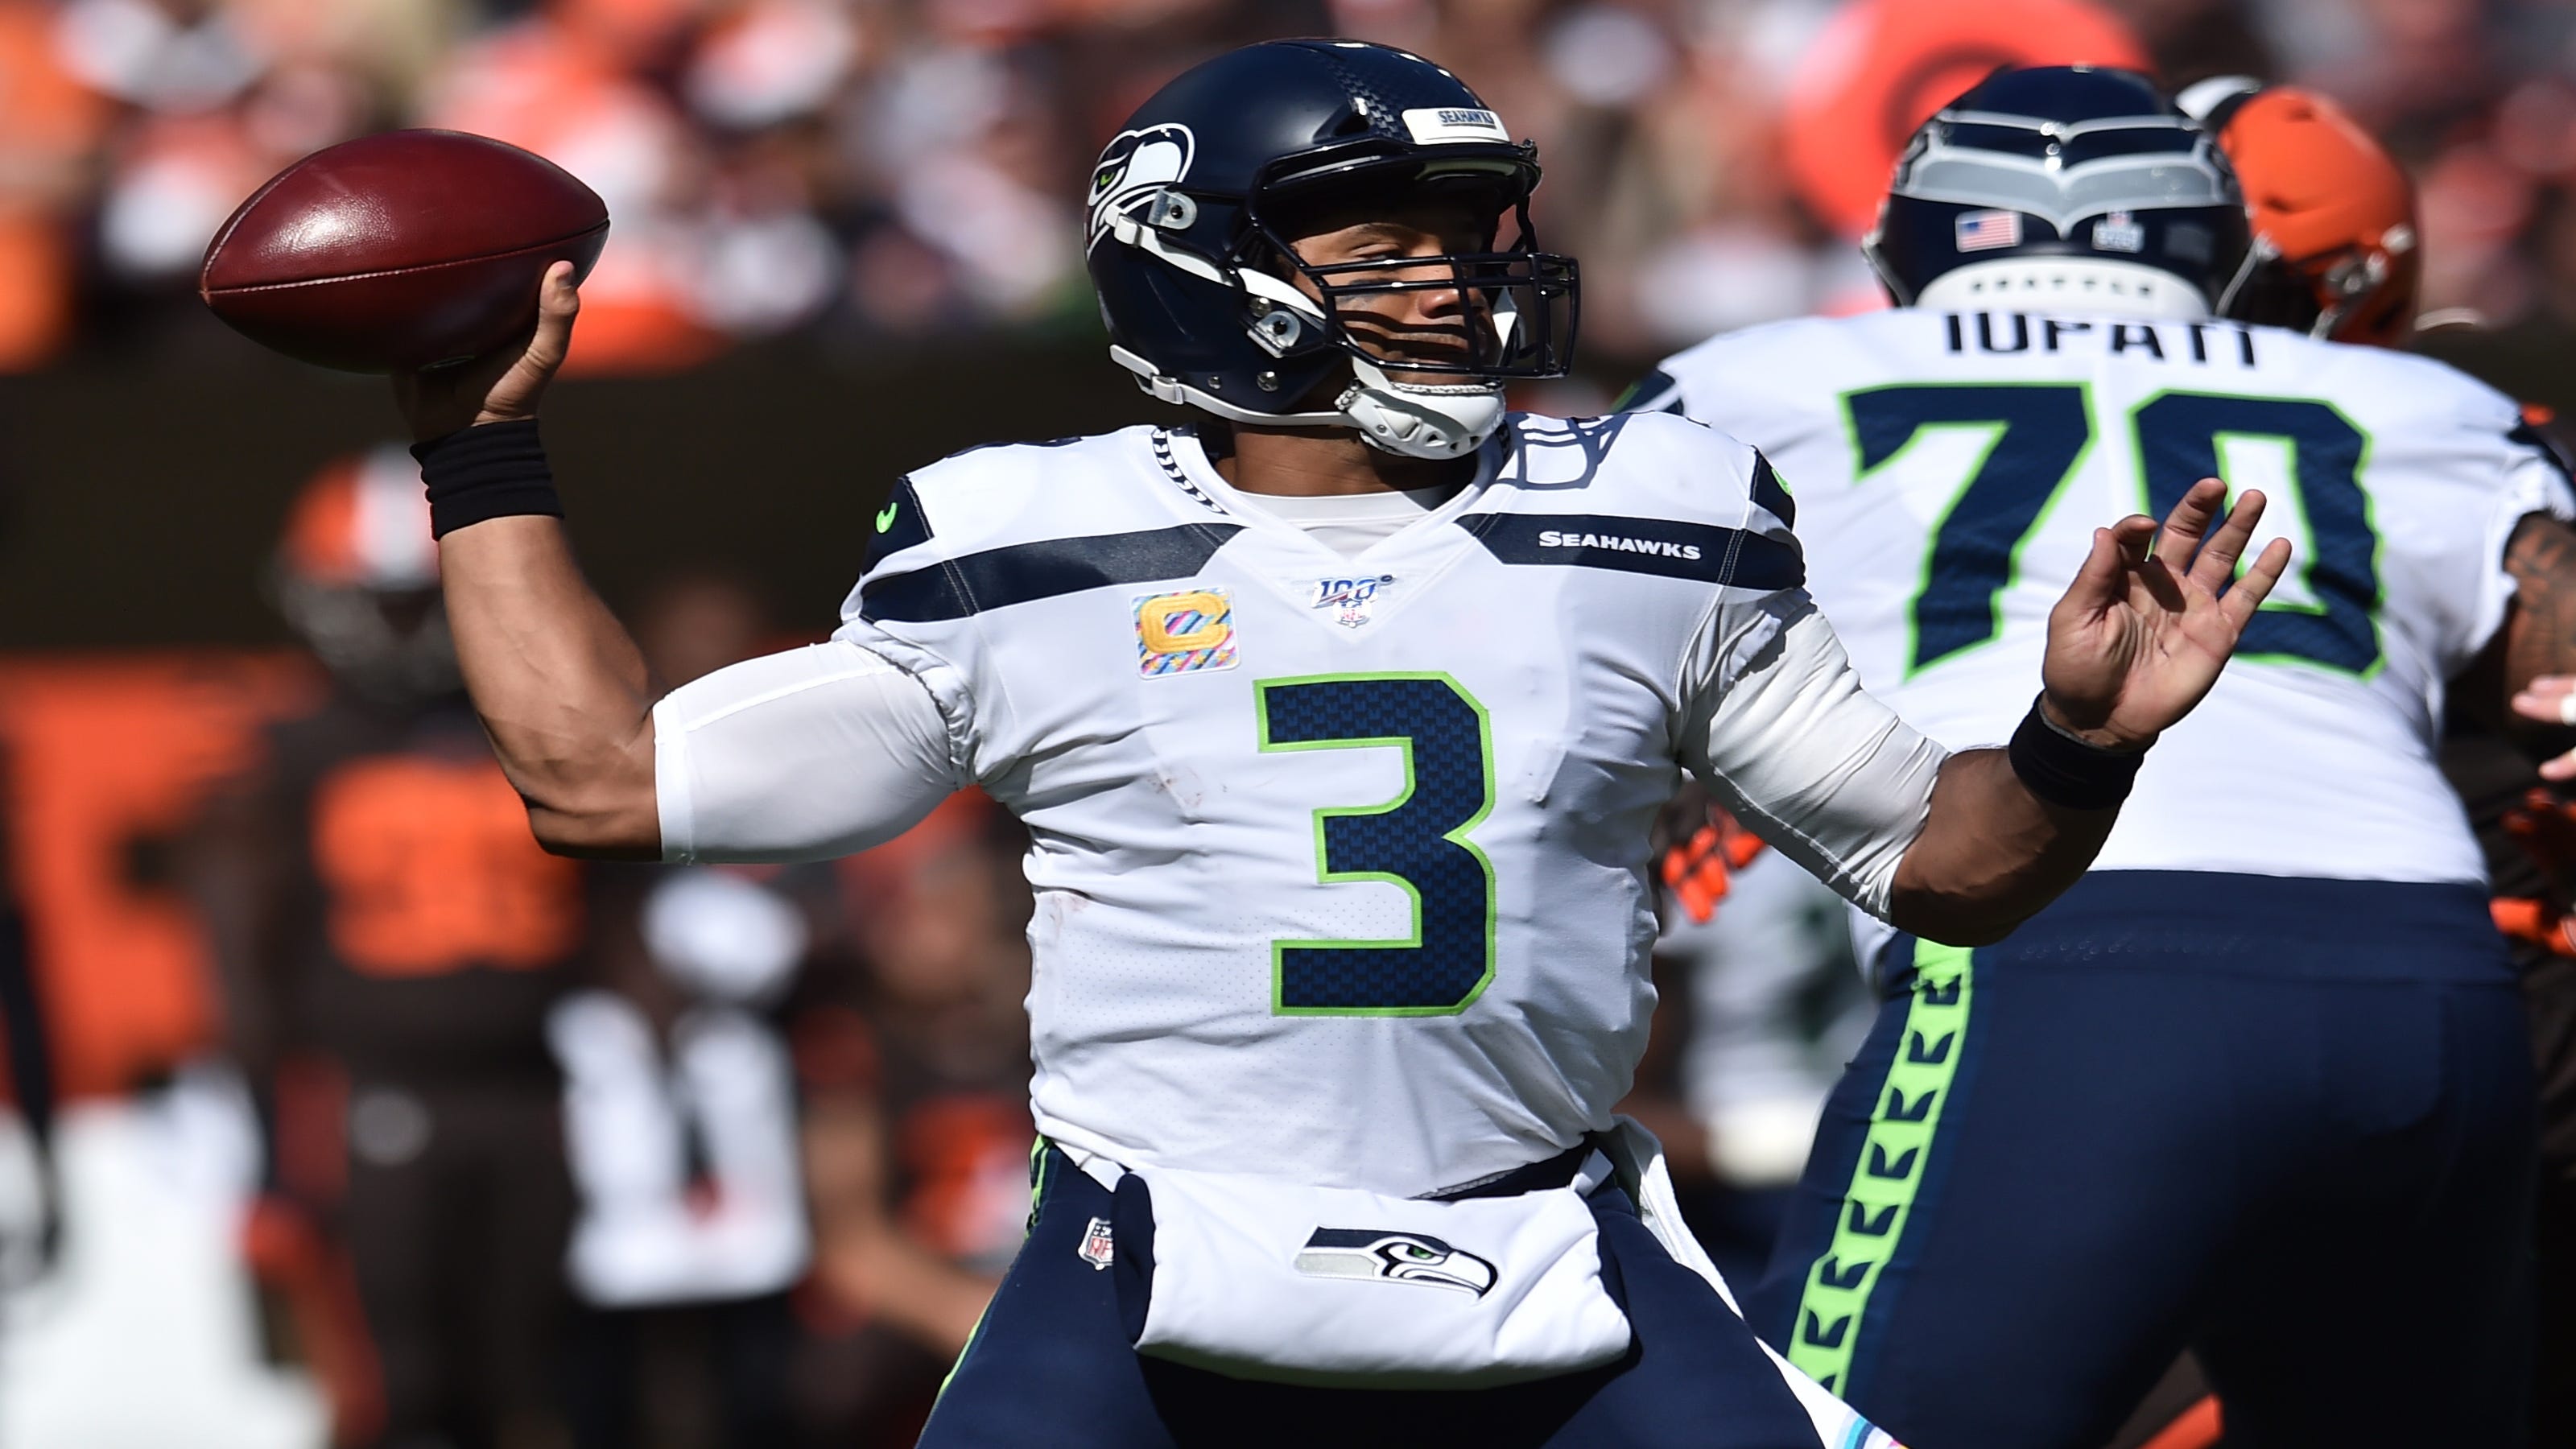 Has Russell Wilson surpassed Patrick Mahomes as the MVP front runner